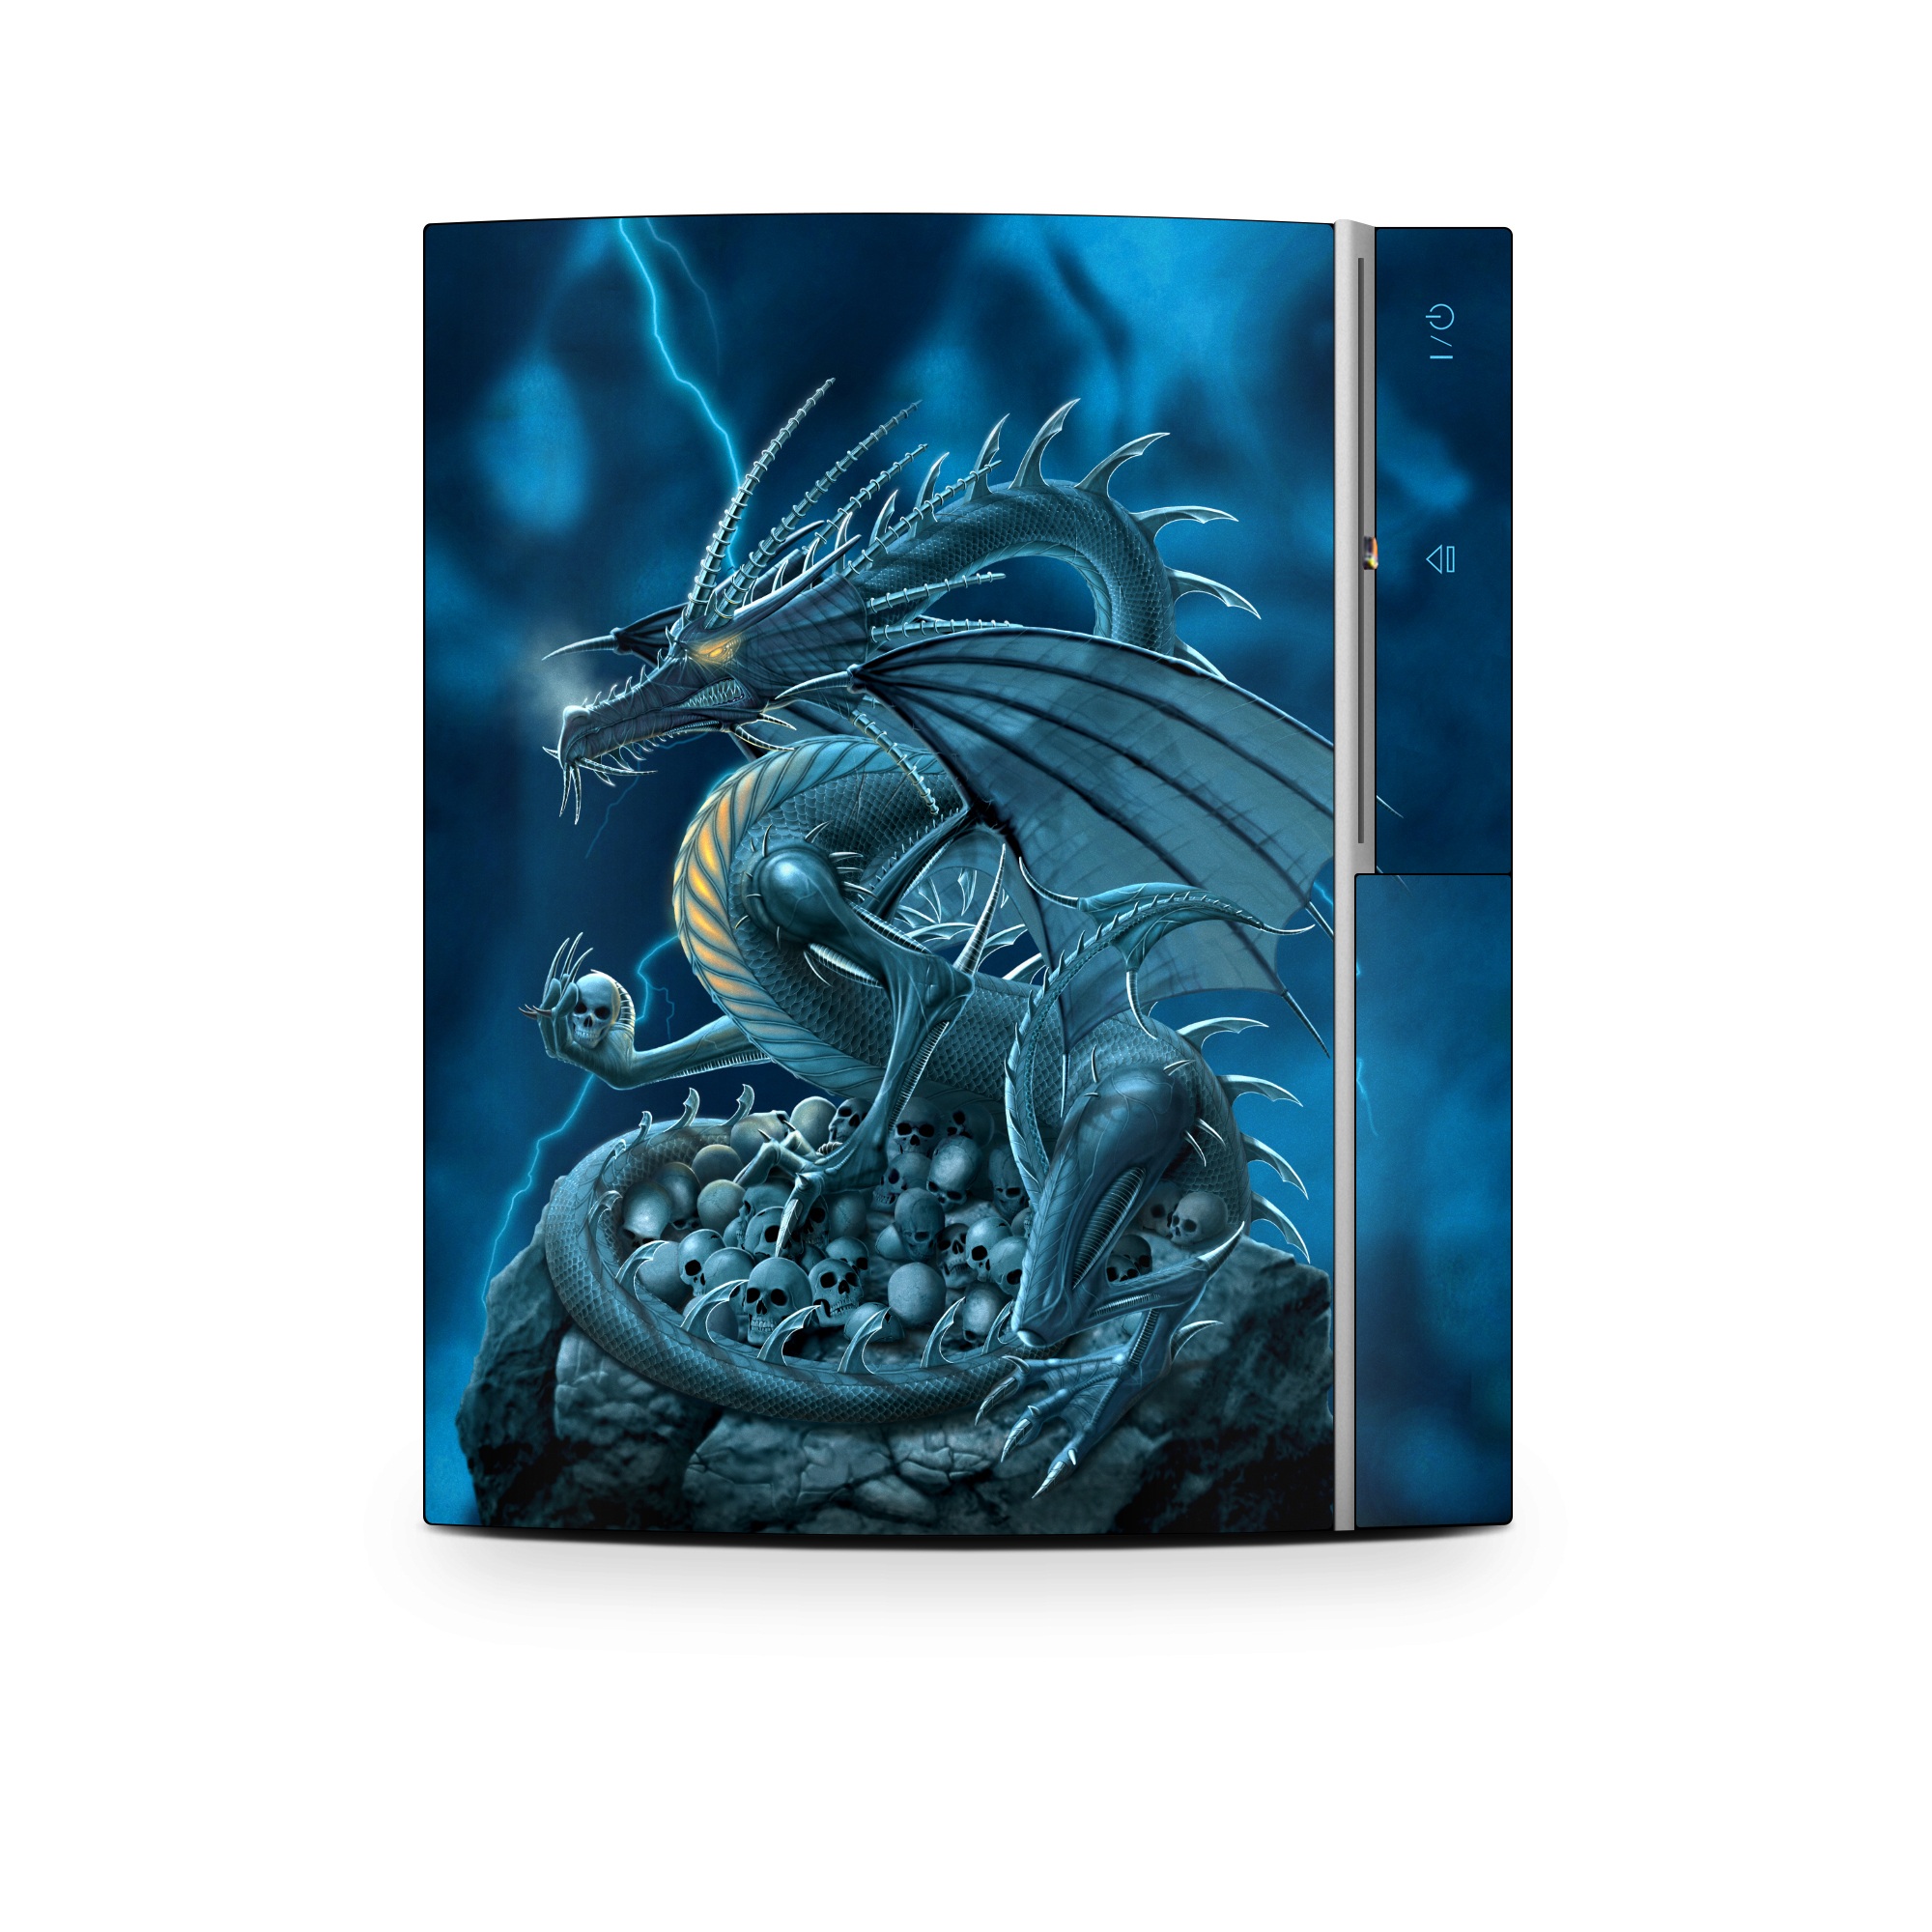 Old PS3 Skin design of Cg artwork, Dragon, Mythology, Fictional character, Illustration, Mythical creature, Art, Demon, with blue, yellow colors